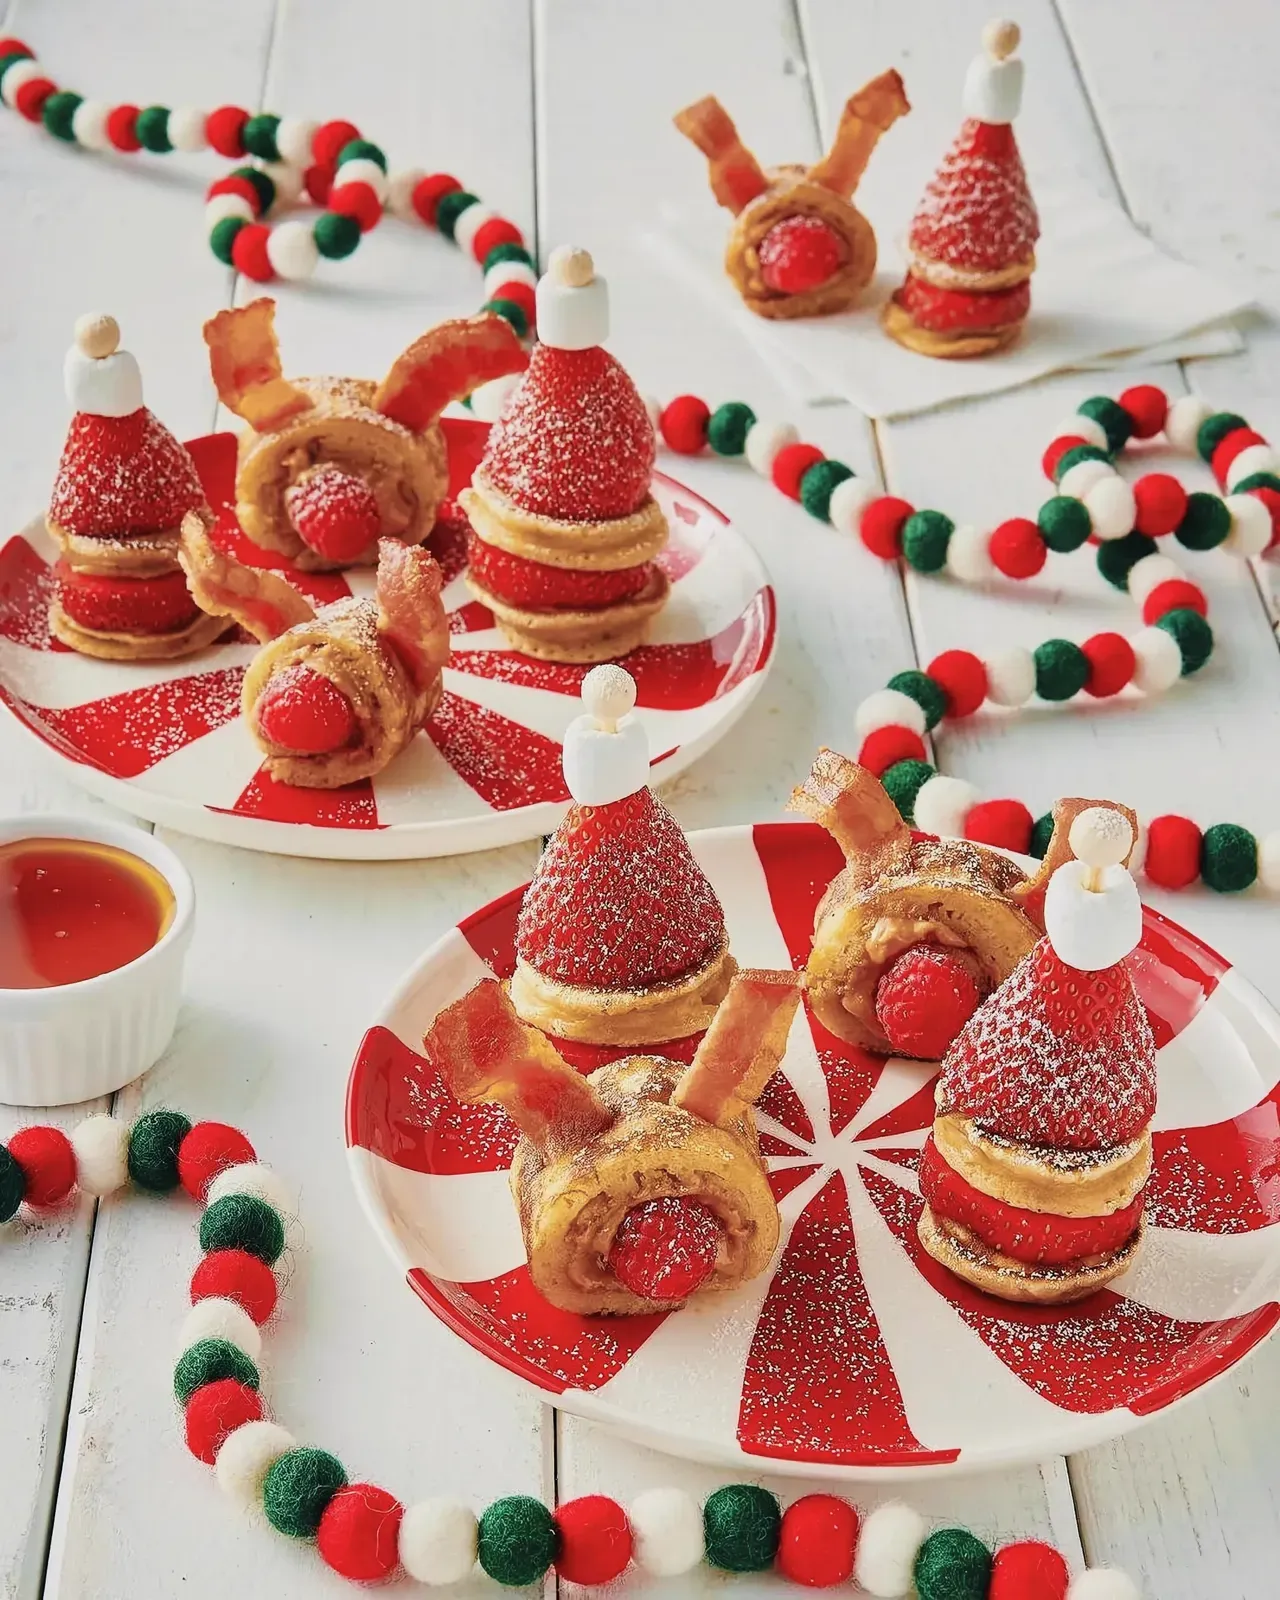 Delightful Christmas finger foods displayed on a red and white striped plate.